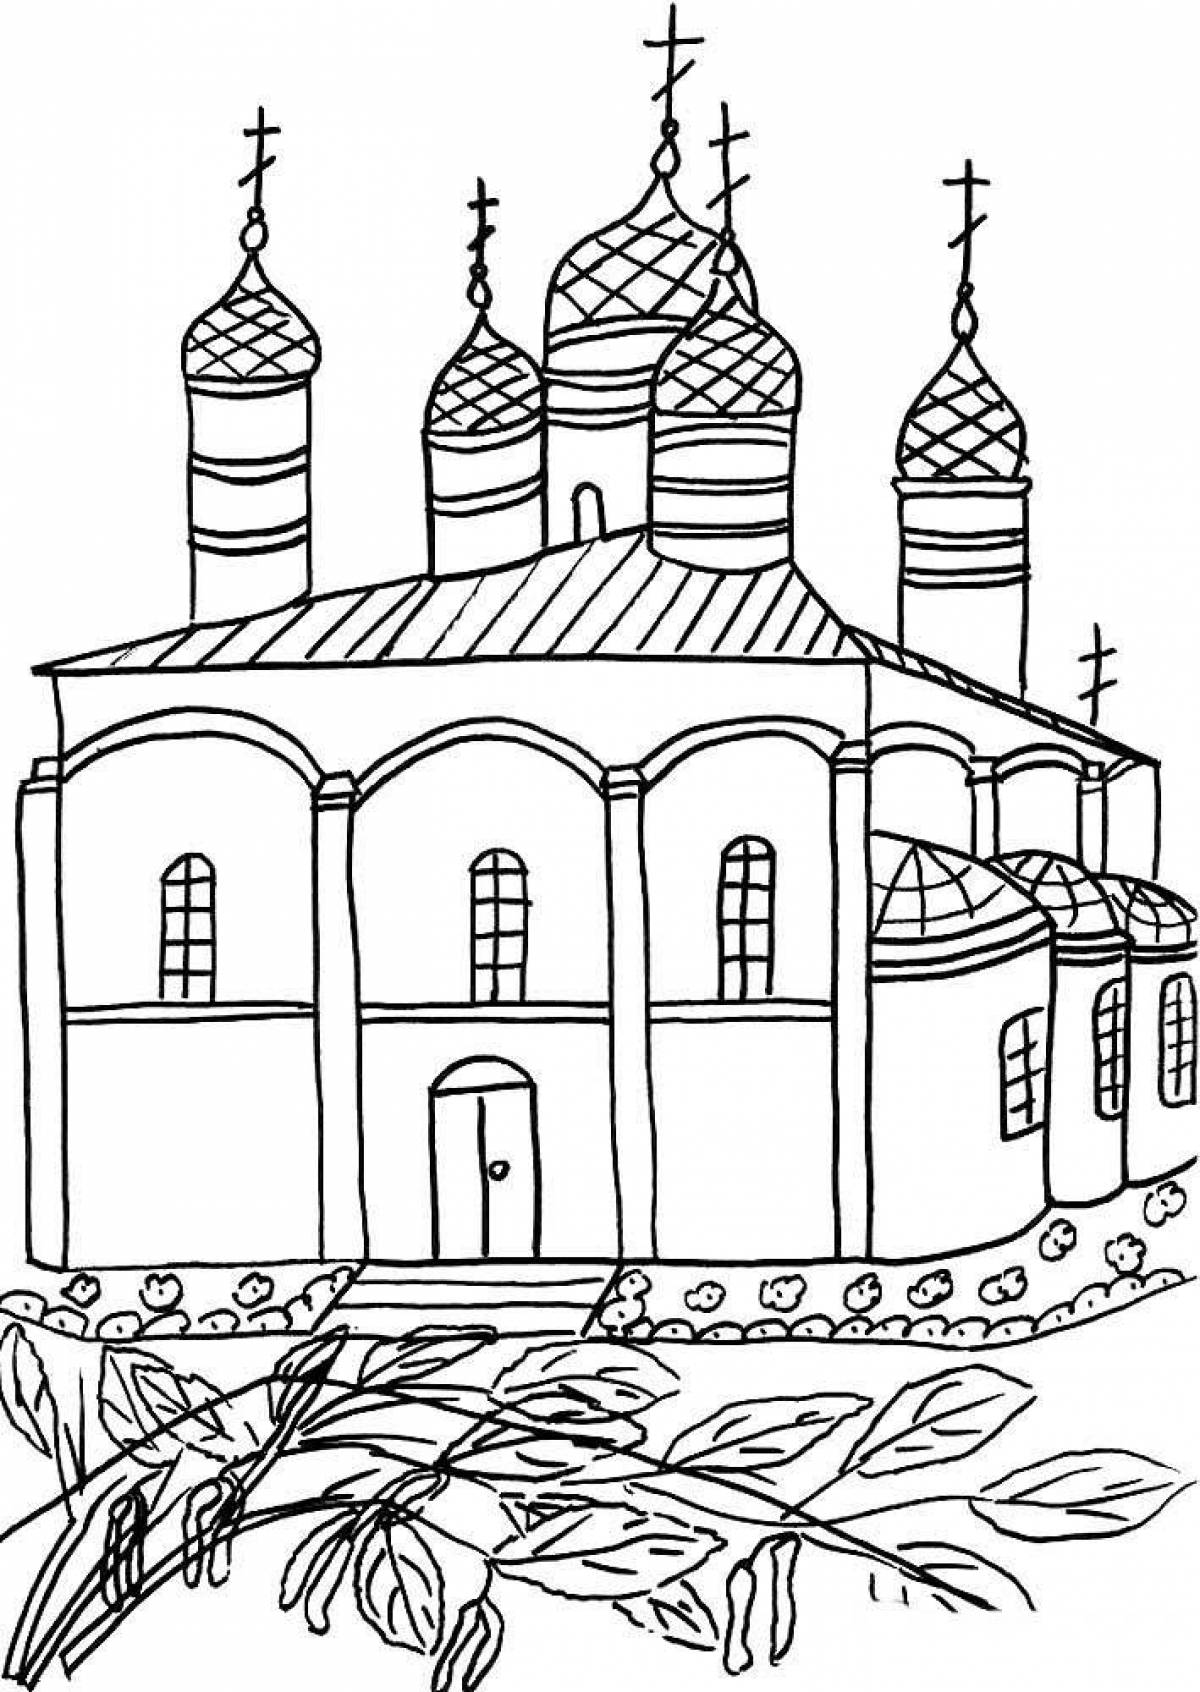 Colorful temple coloring book